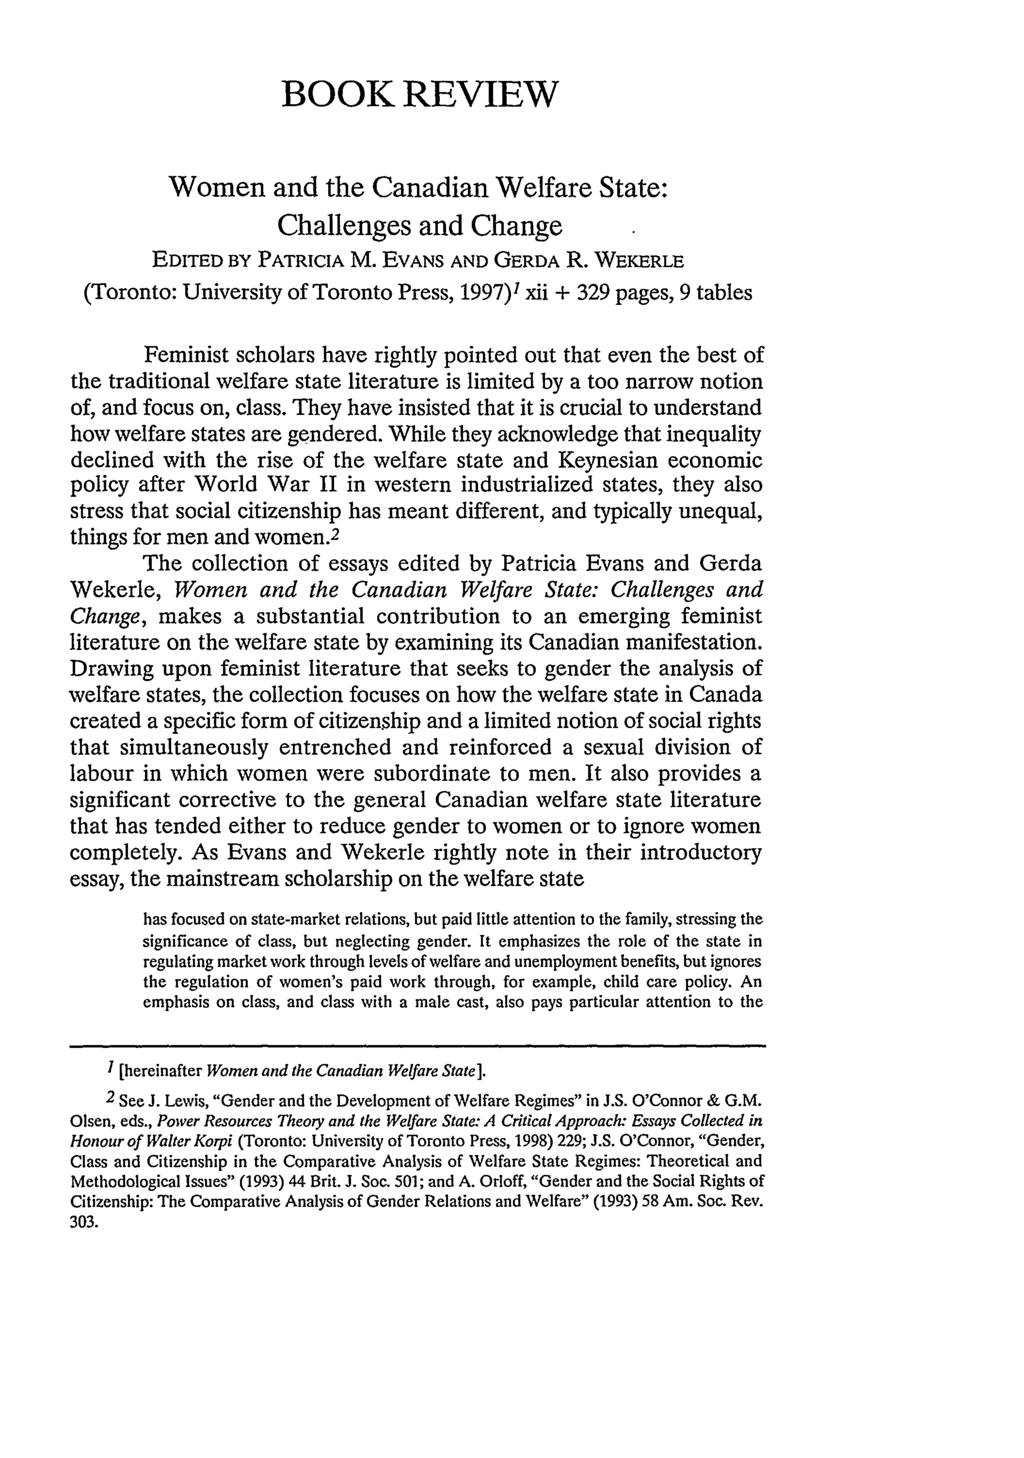 BOOK REVIEW Women and the Canadian Welfare State: Challenges and Change EDITED BY PATRICIA M. EVANS AND GERDA R.